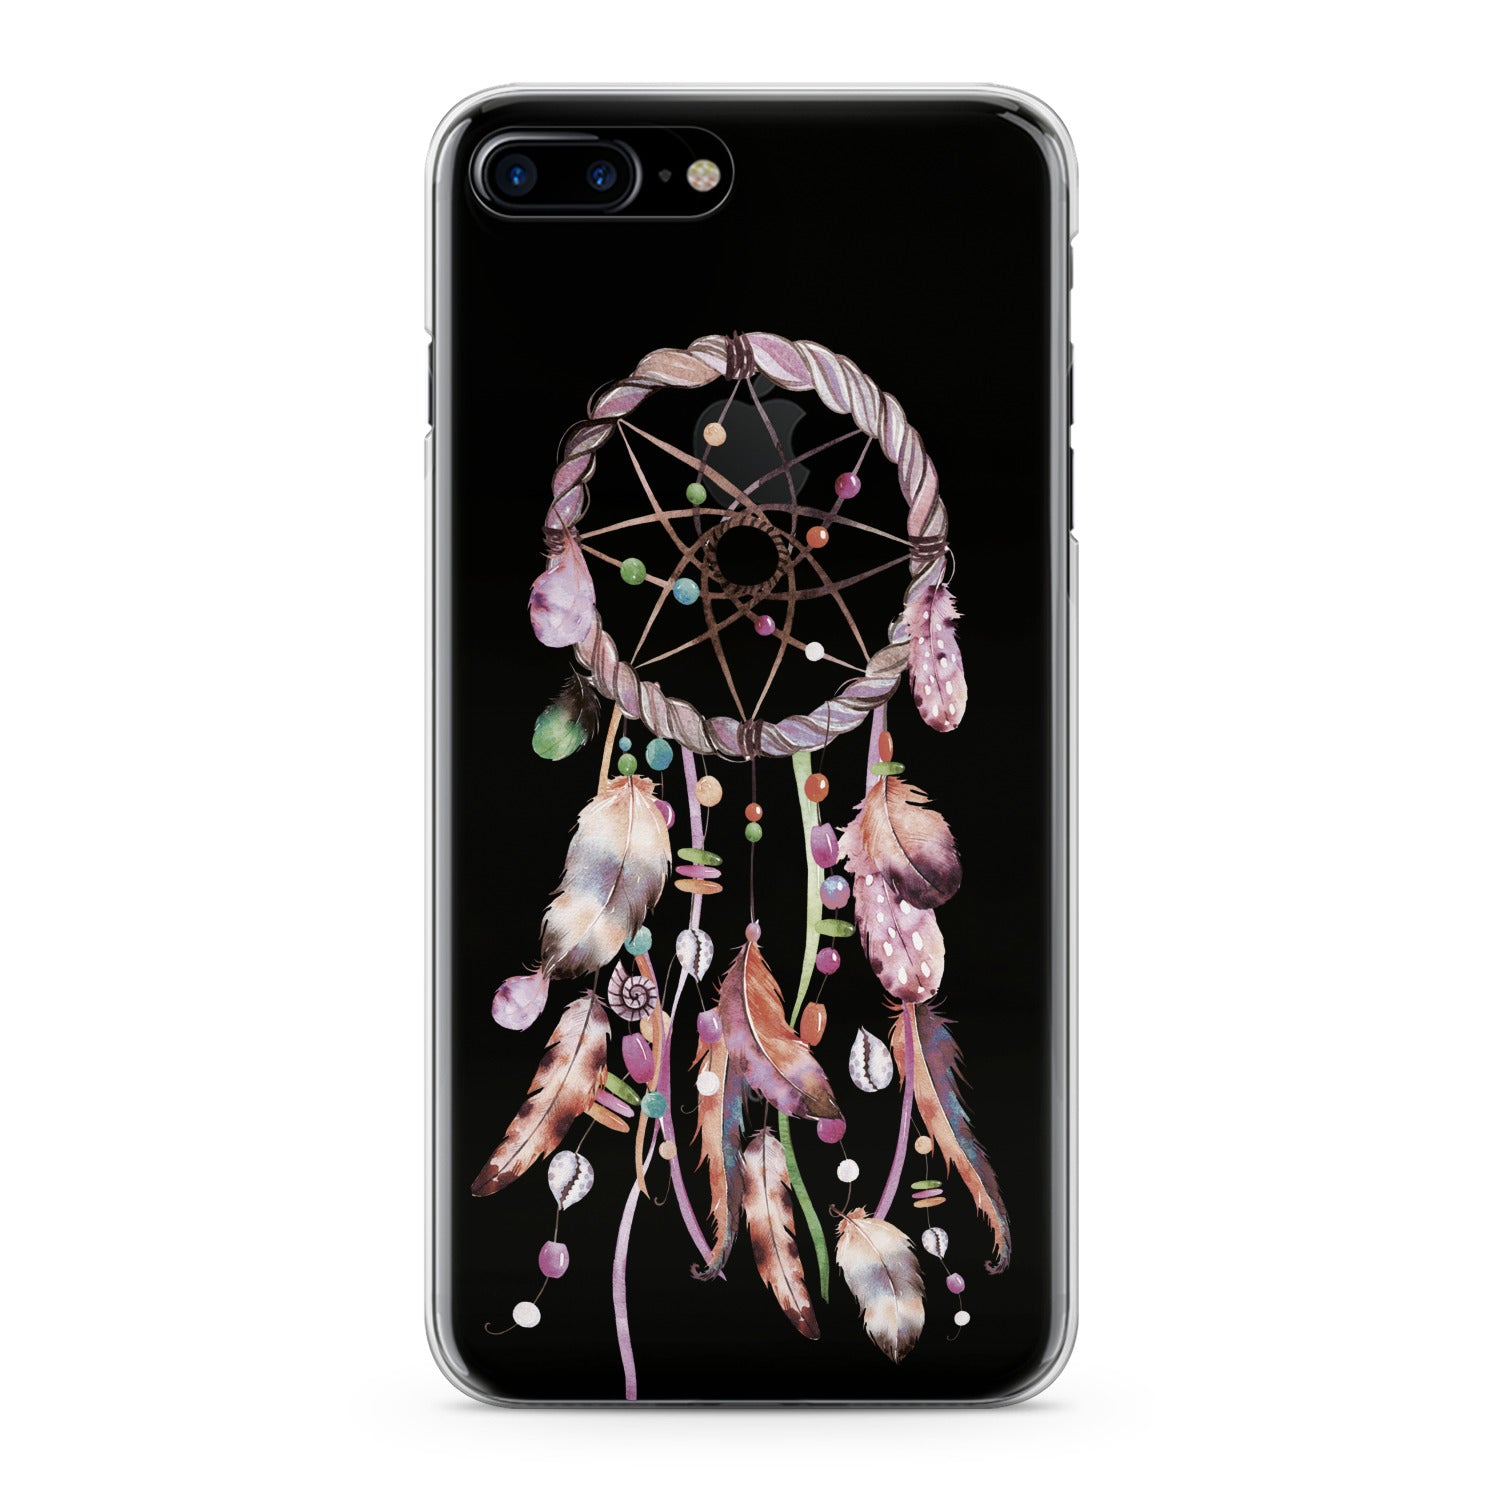 Lex Altern Feather Dreamcatcher Phone Case for your iPhone & Android phone.